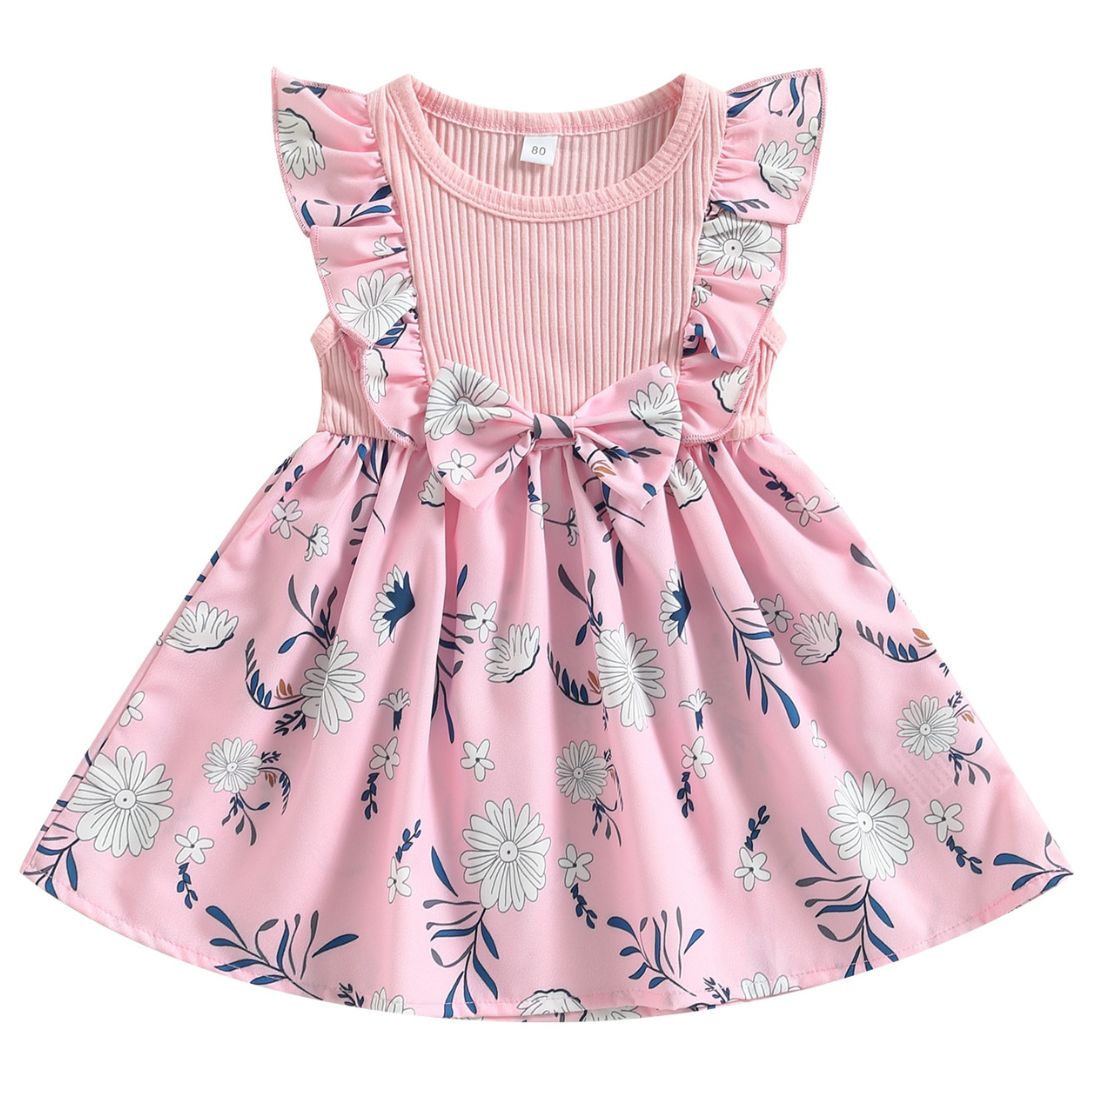 Toddler Girl Bowknot Frilly Floral Dress - My Trendy Youngsters | Buy on-trend and stylish Baby and Toddler dresses @ My Trendy Youngsters - Dress your little one in Style @ My Trendy Youngsters 